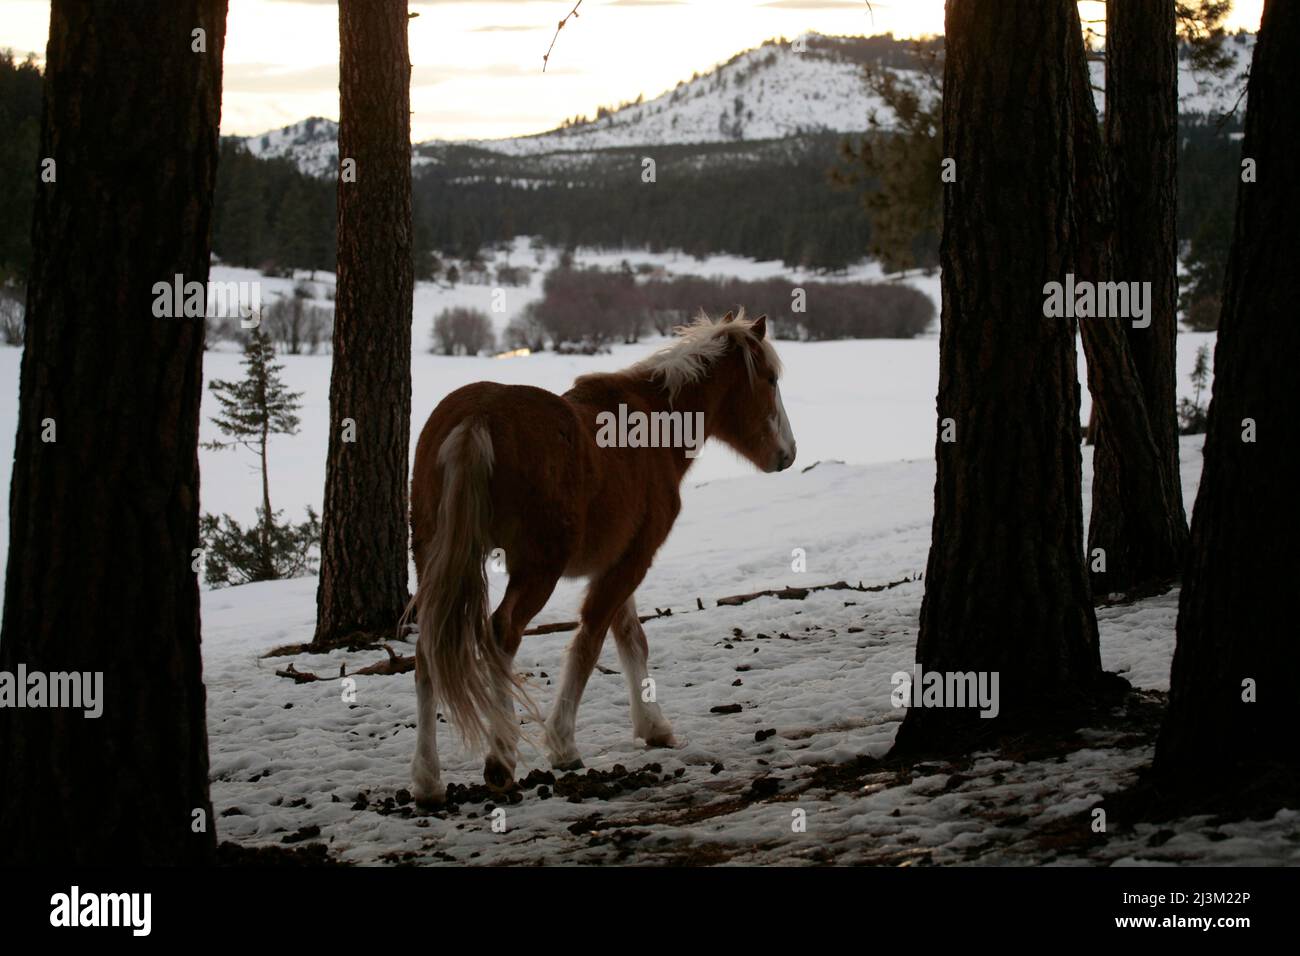 Wild horse struggles to find food in the snow packed mountains, Ochoco National Forest; Prineville, Oregon, United States of America Stock Photo